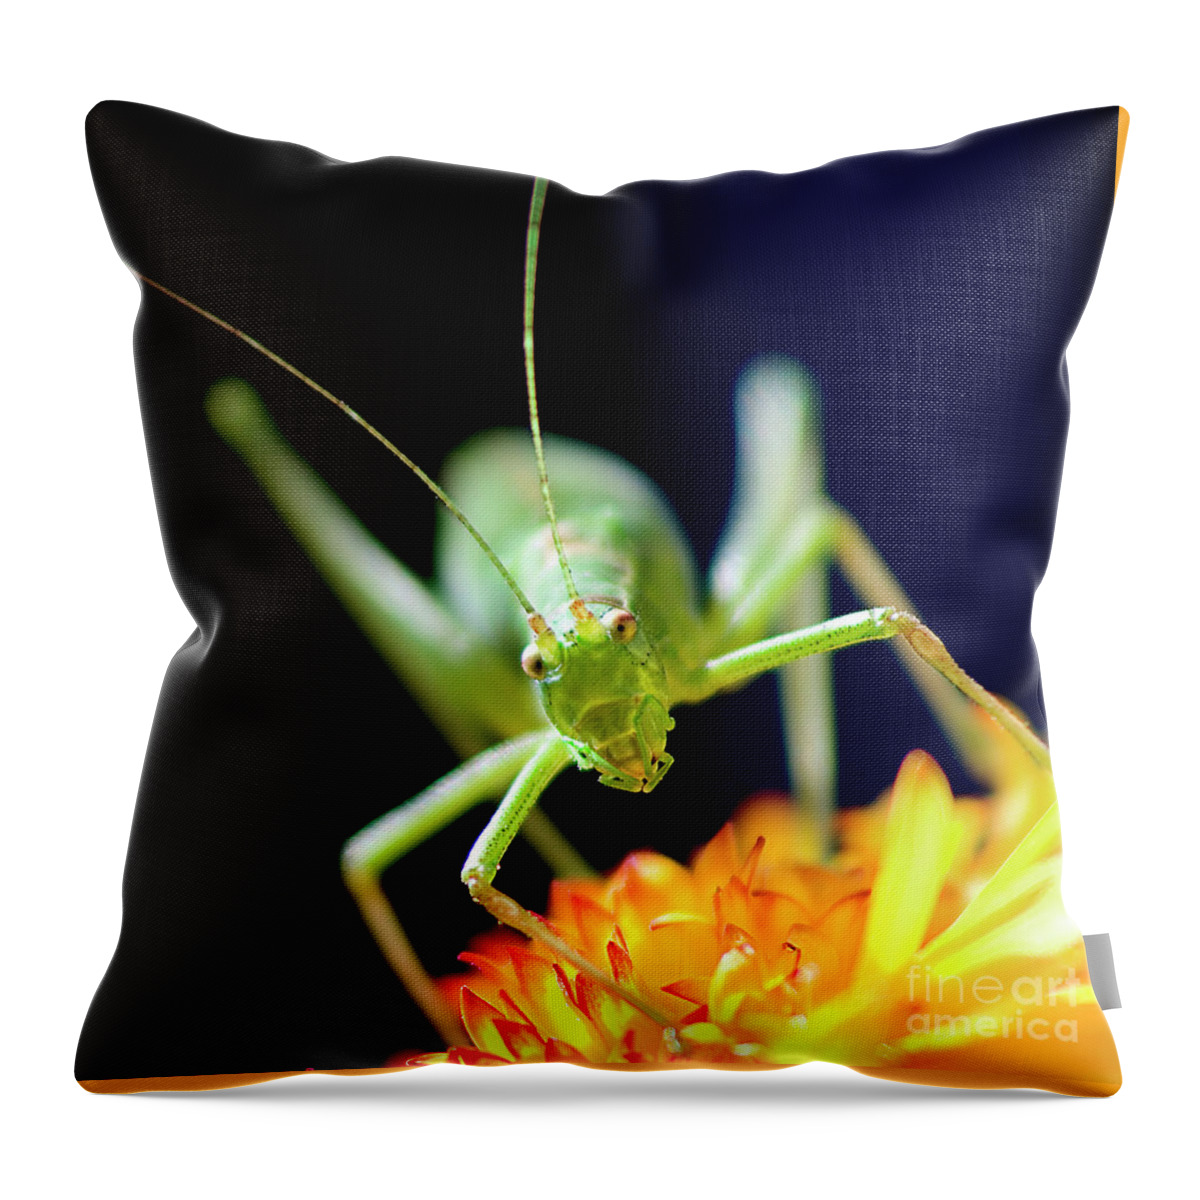 Face To Face Throw Pillow featuring the photograph Face To Face, Pop-eyed Beauty, by Tatiana Bogracheva